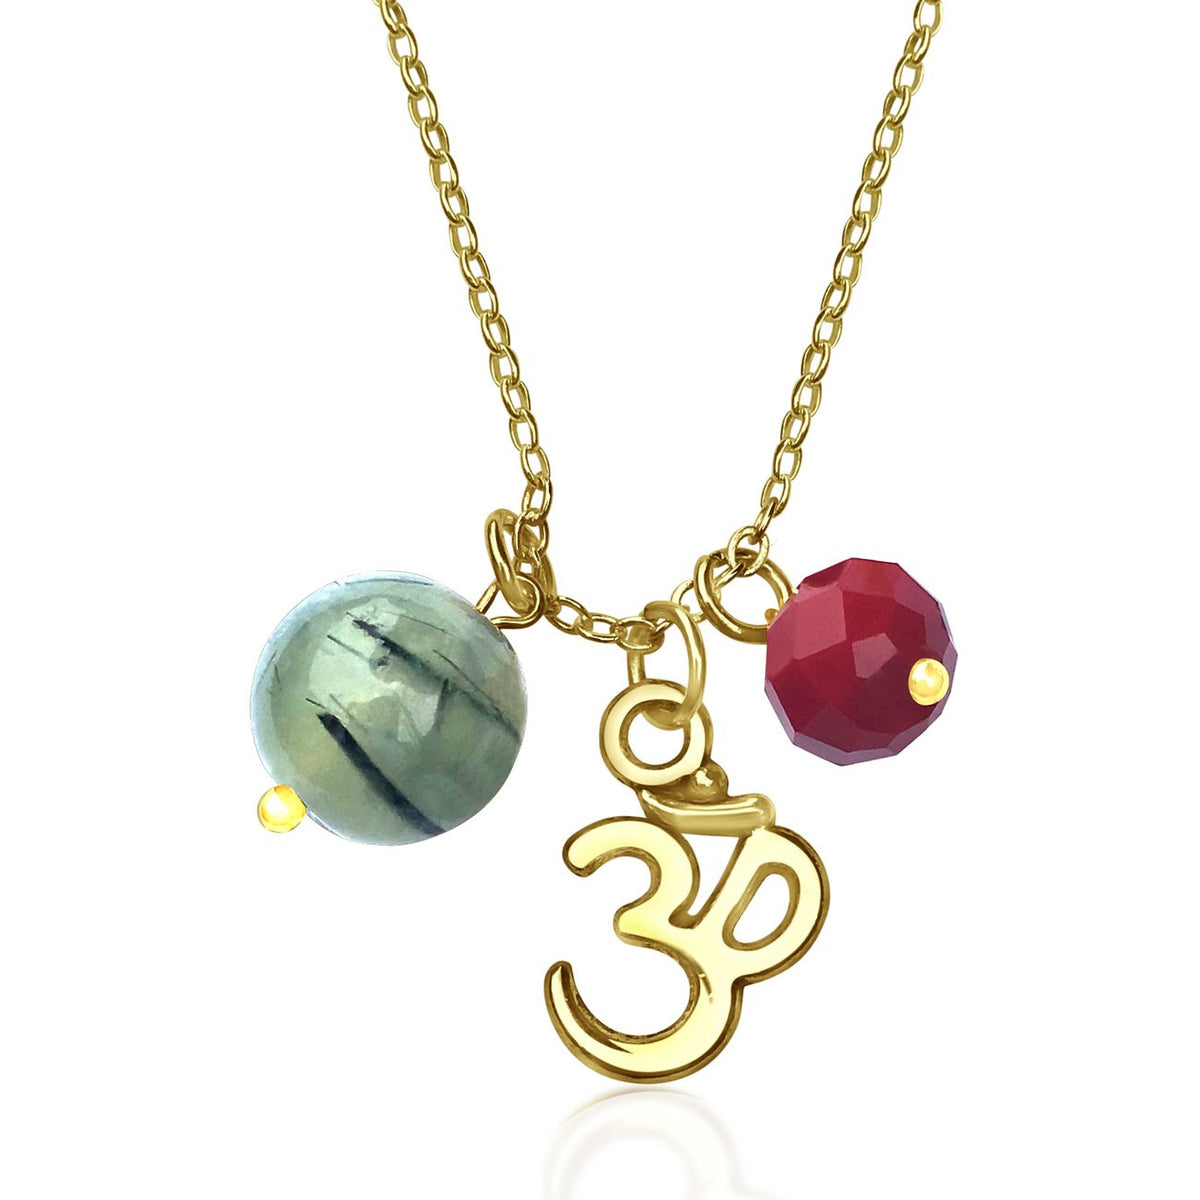 Ohm Charm Necklace with Prehnite and Red Crystal (GF)